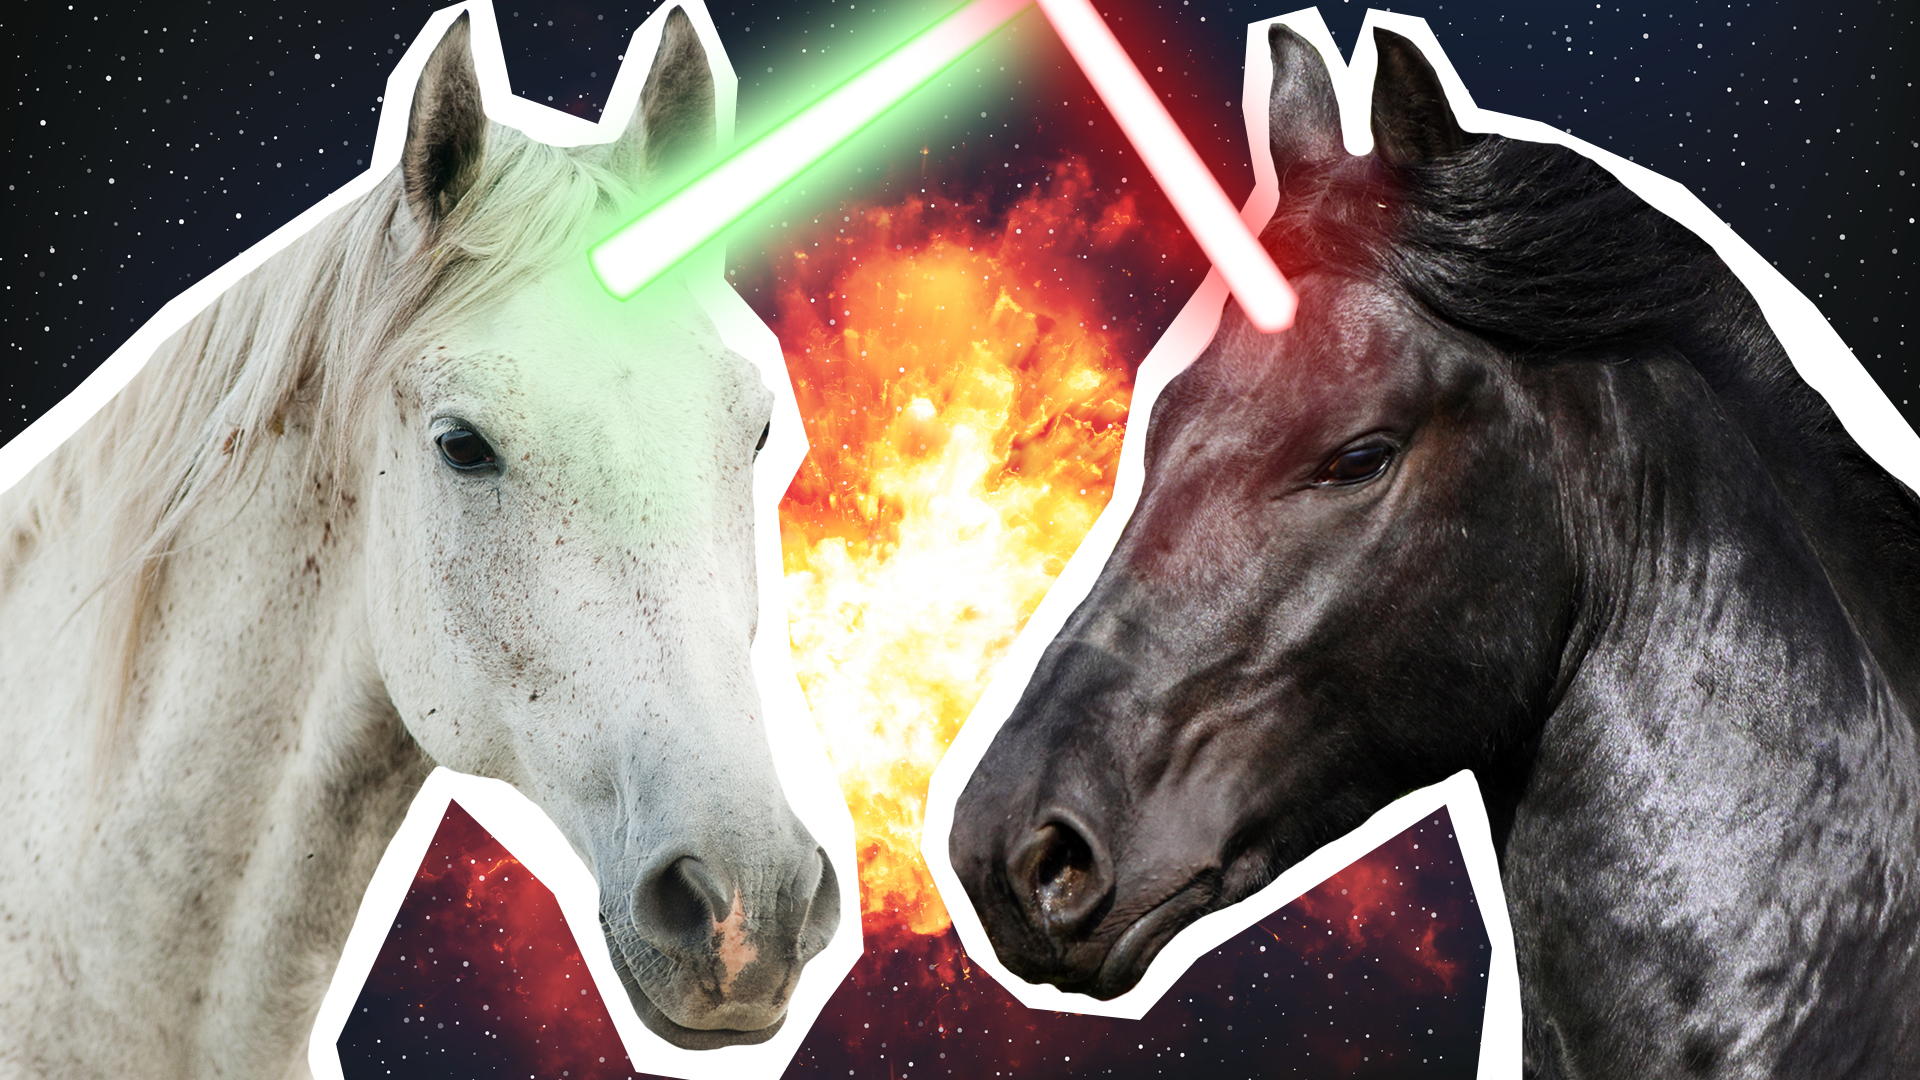 jedi unicorn and sith unicorn locked in battle for all eternity! War is bad guys - don't do it!